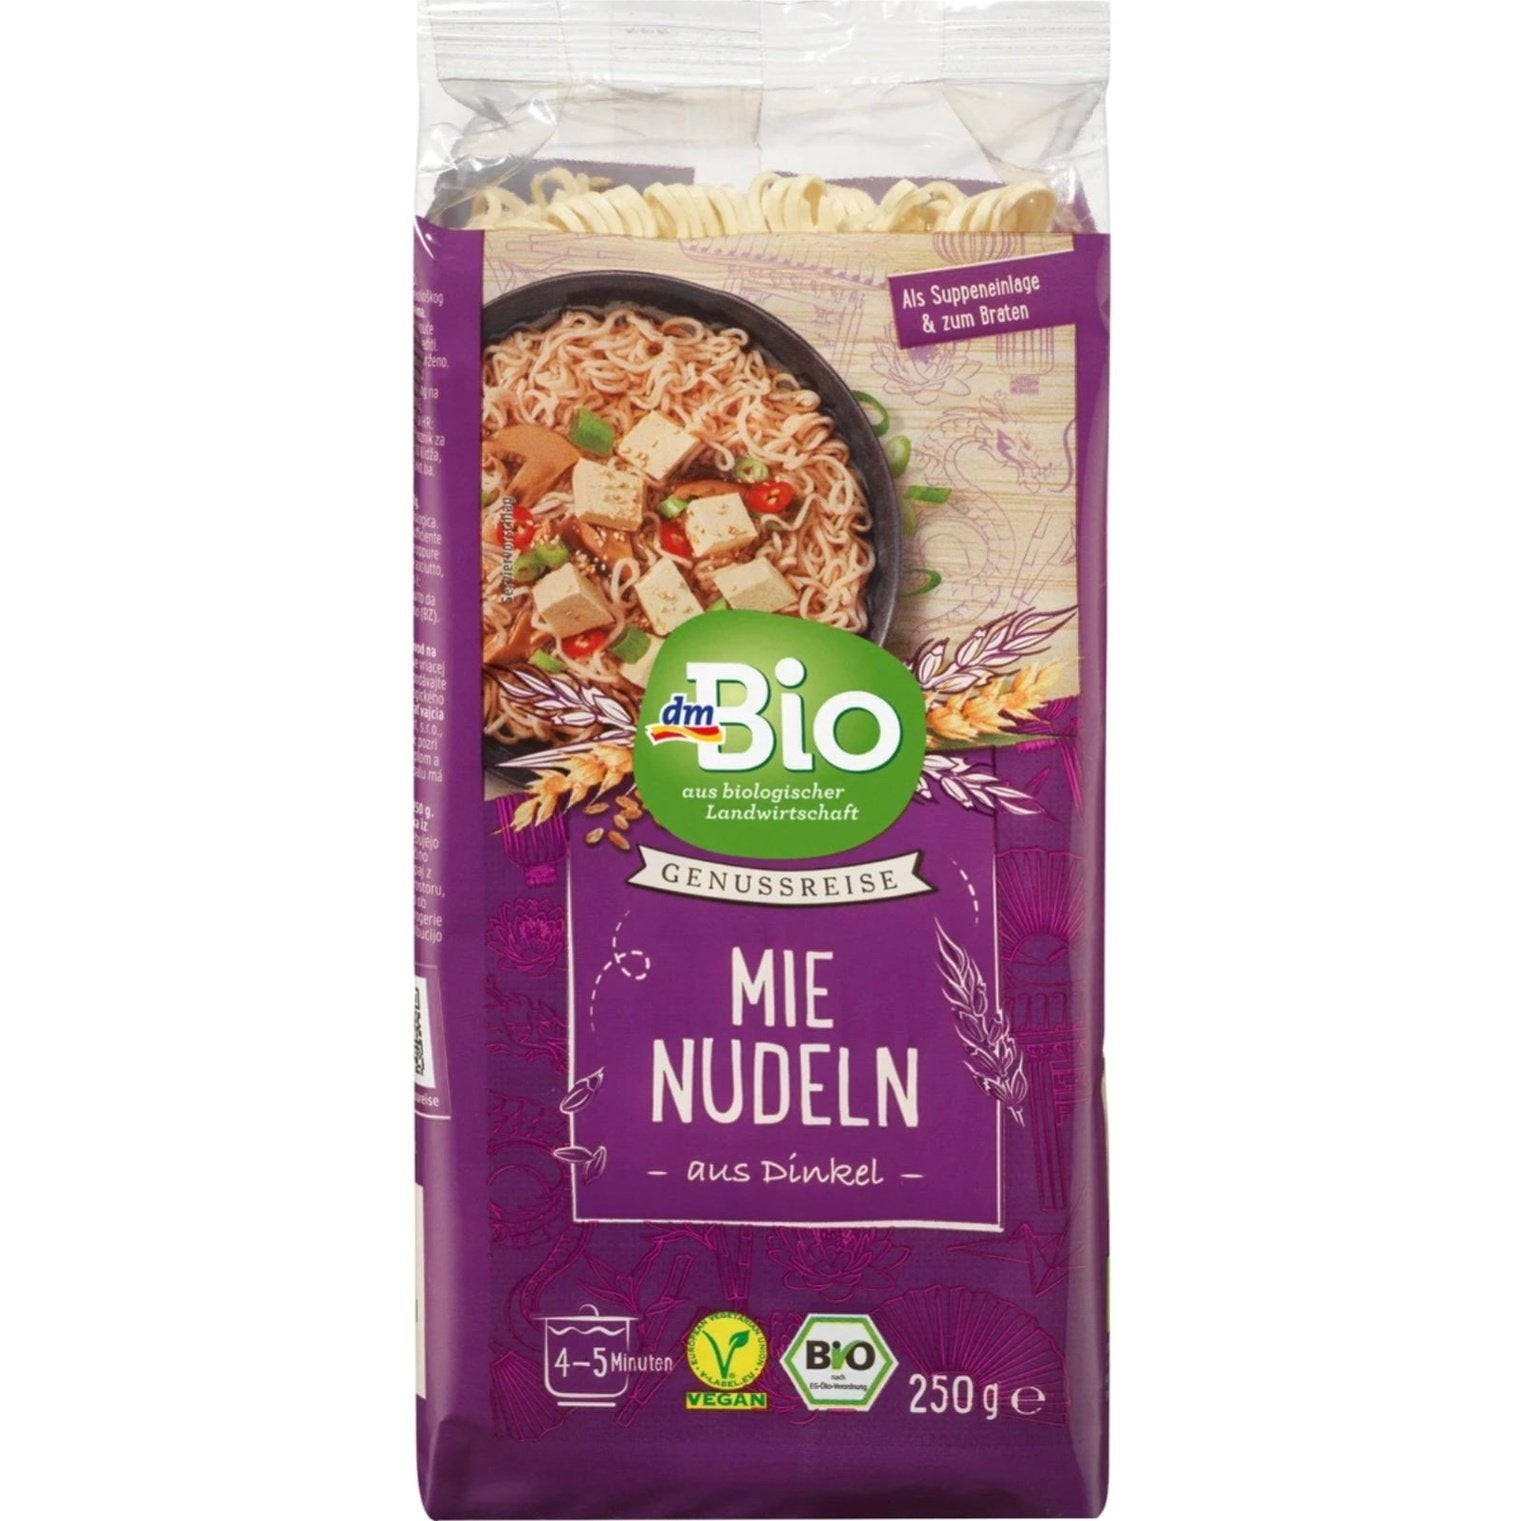 bio organic mie noodle front purple packaging